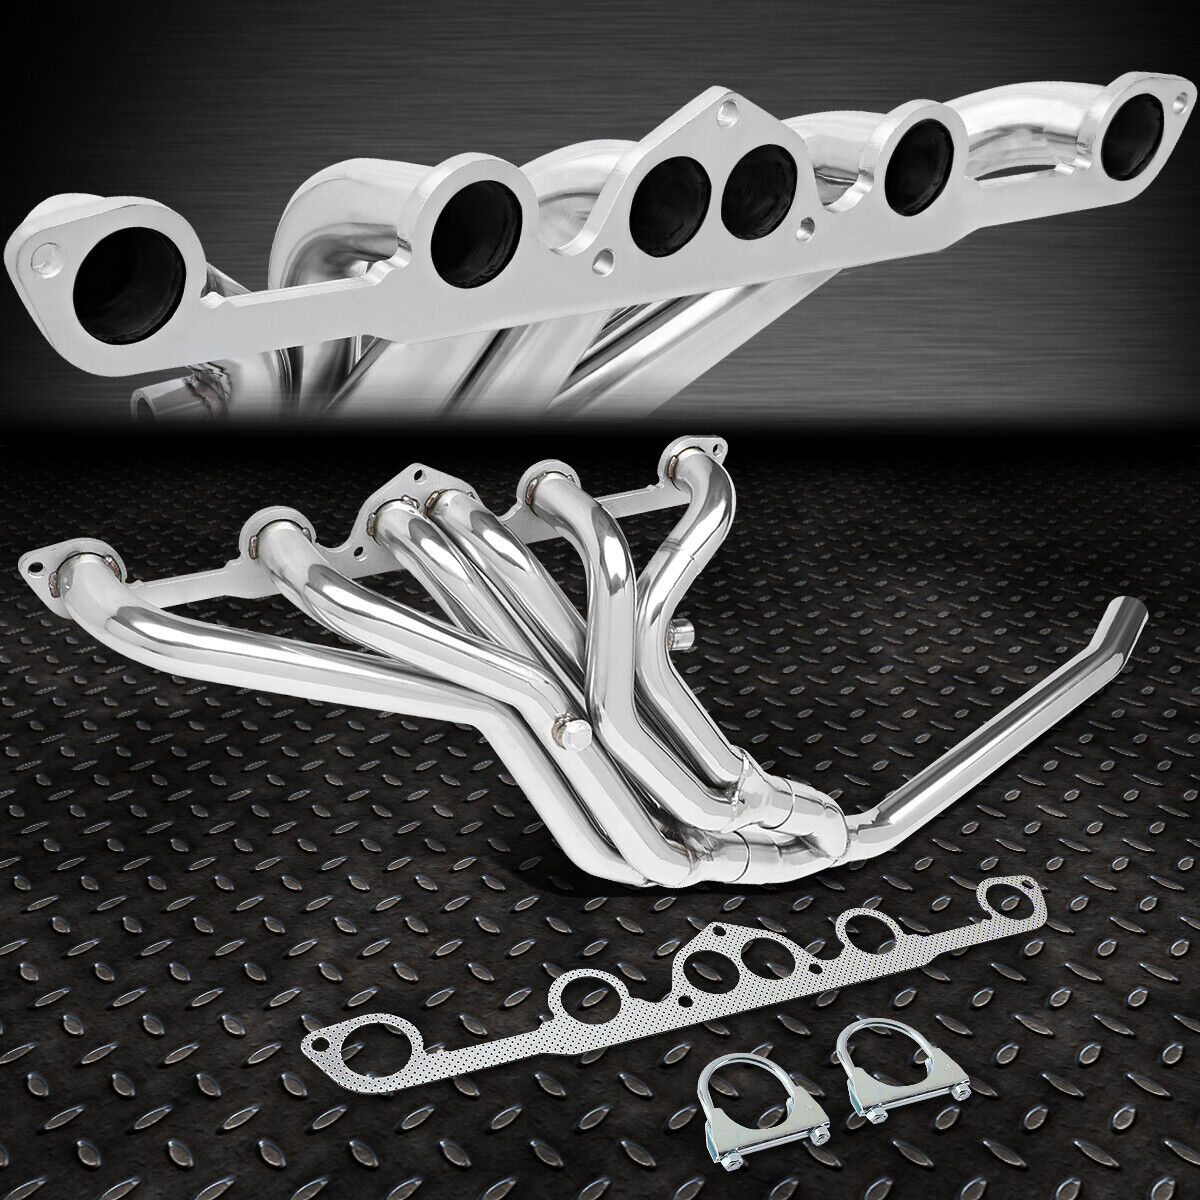 FOR 77-83 DATSUN 280Z/280ZX 2.8L NON TURBO MID LENGTH EXHAUST HEADER MANIFOLD